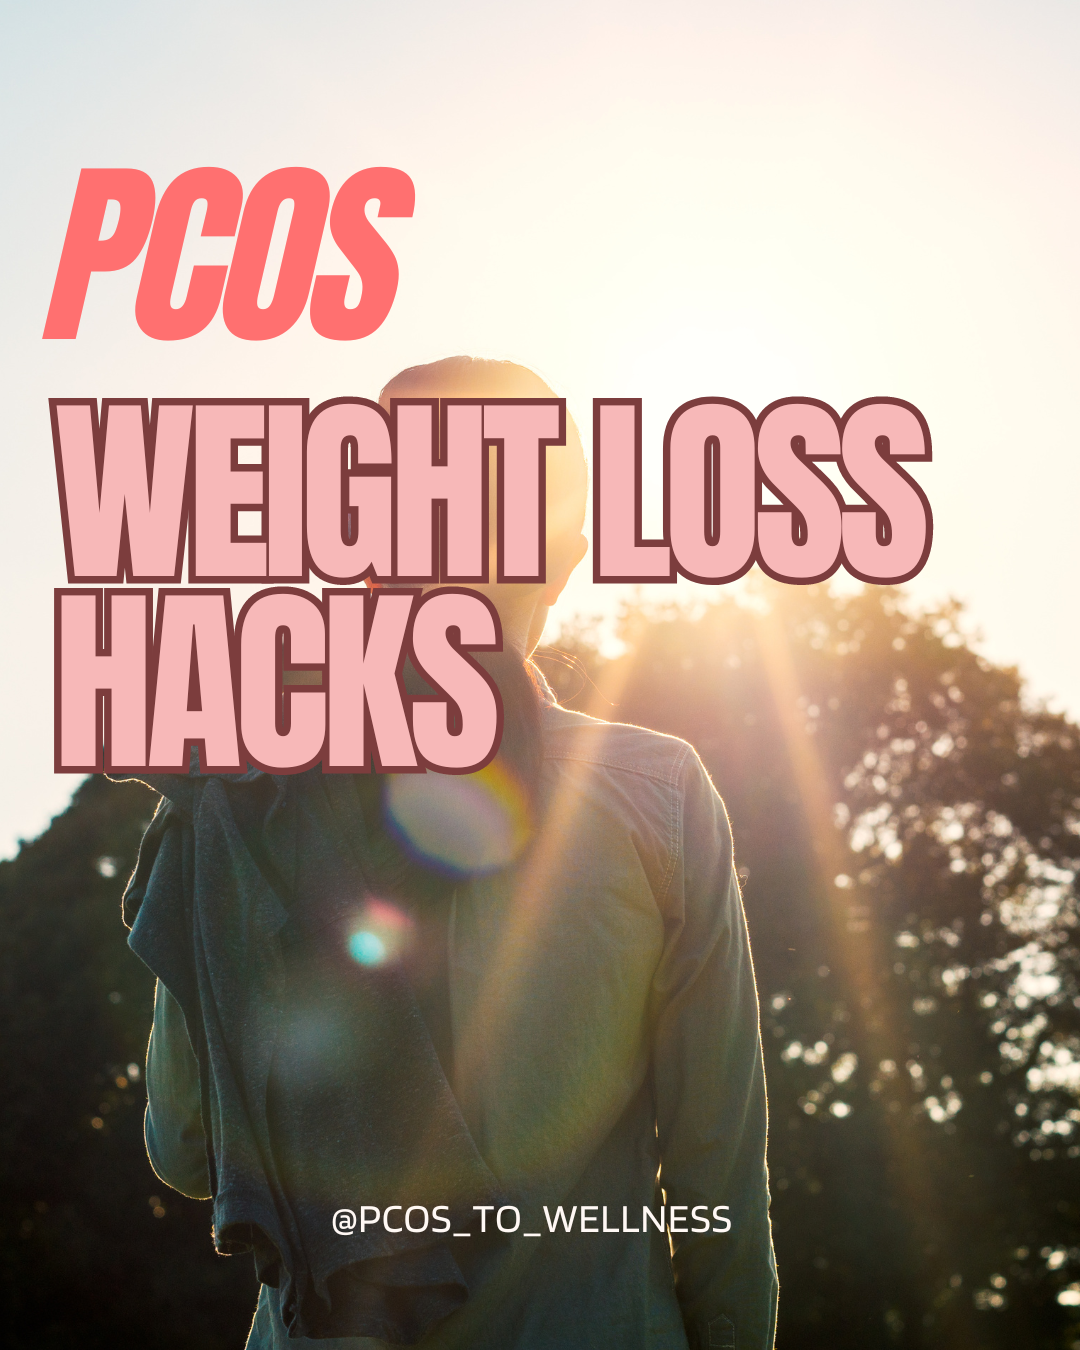 PCOS Weight Loss Hacks (that actually work)